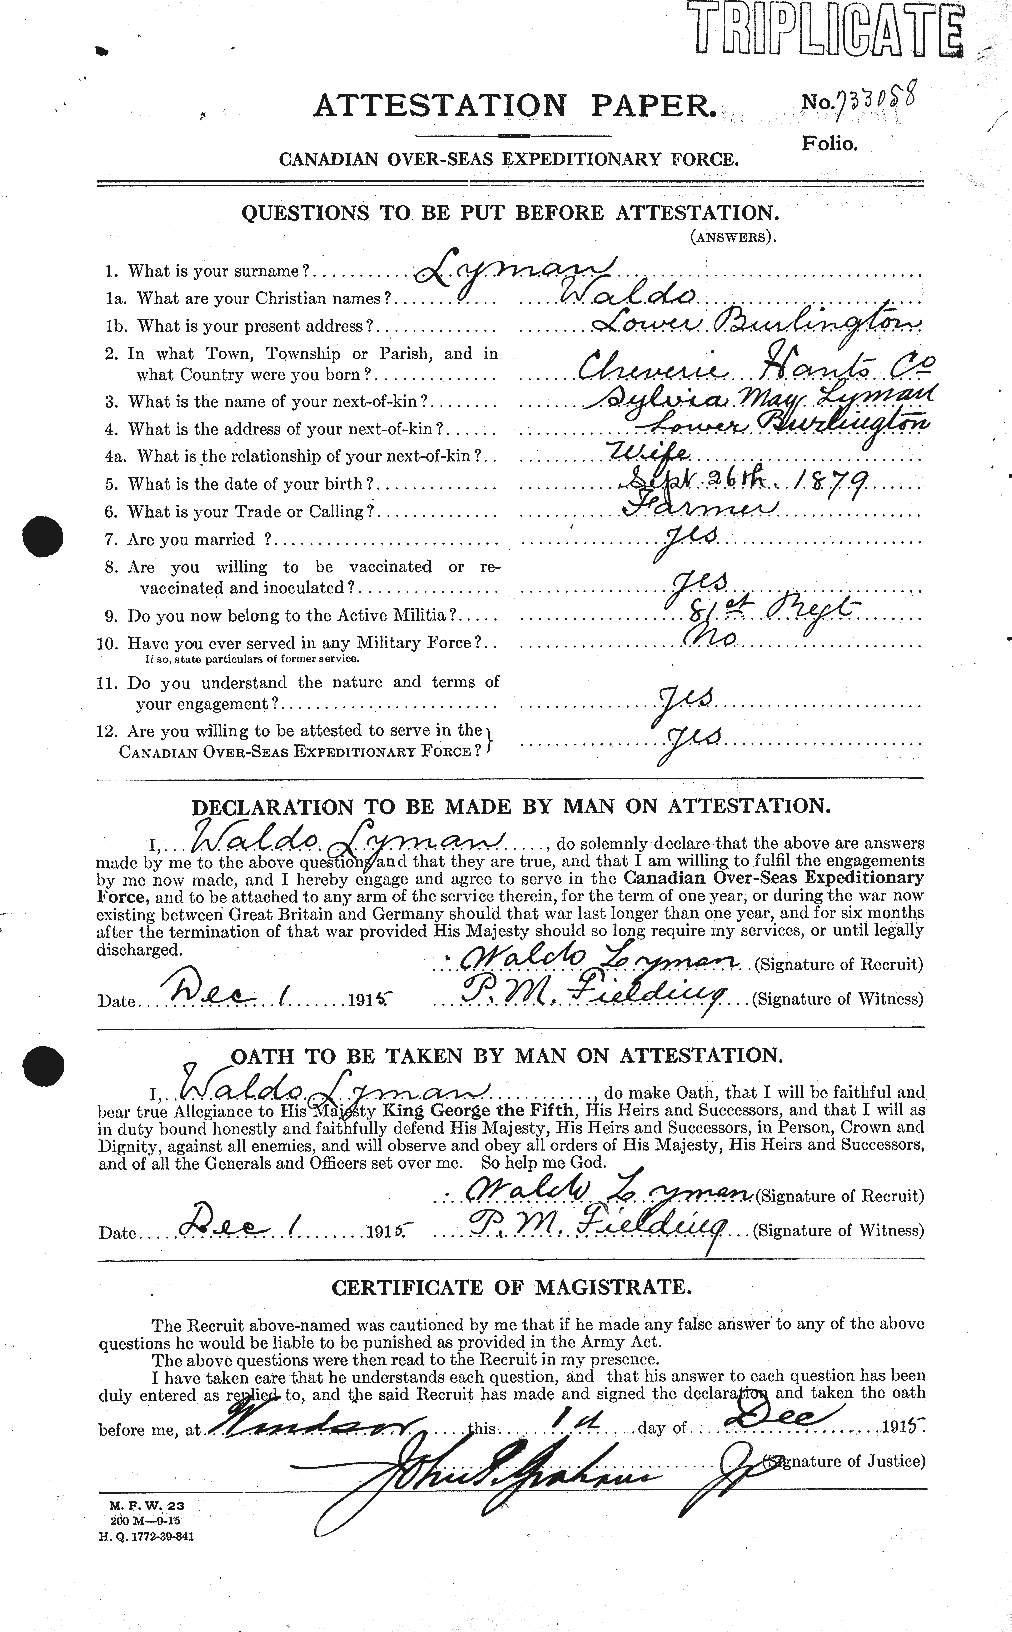 Personnel Records of the First World War - CEF 471834a